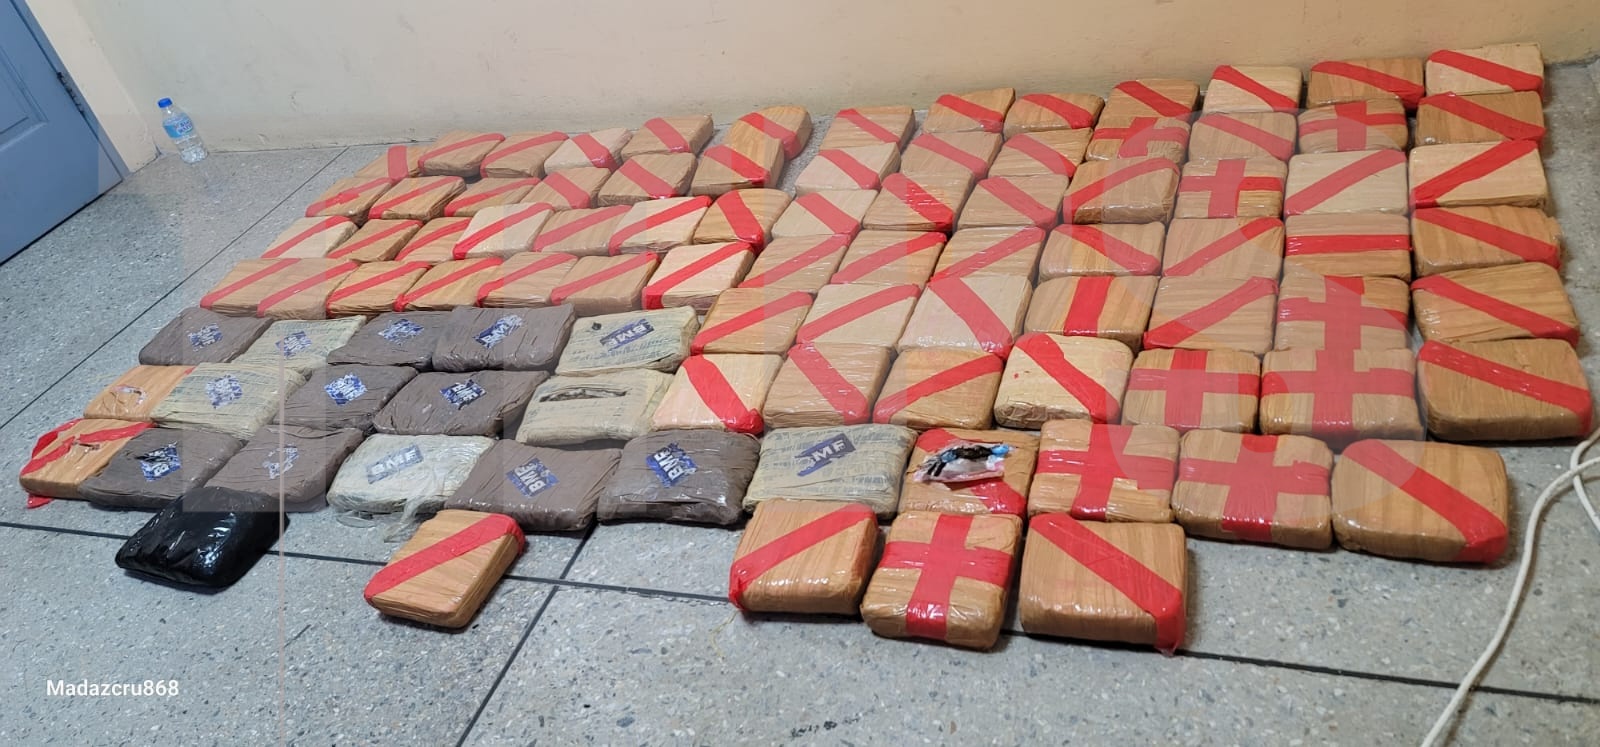 Over $1.7 million in marijuana seized by officers in Western Division